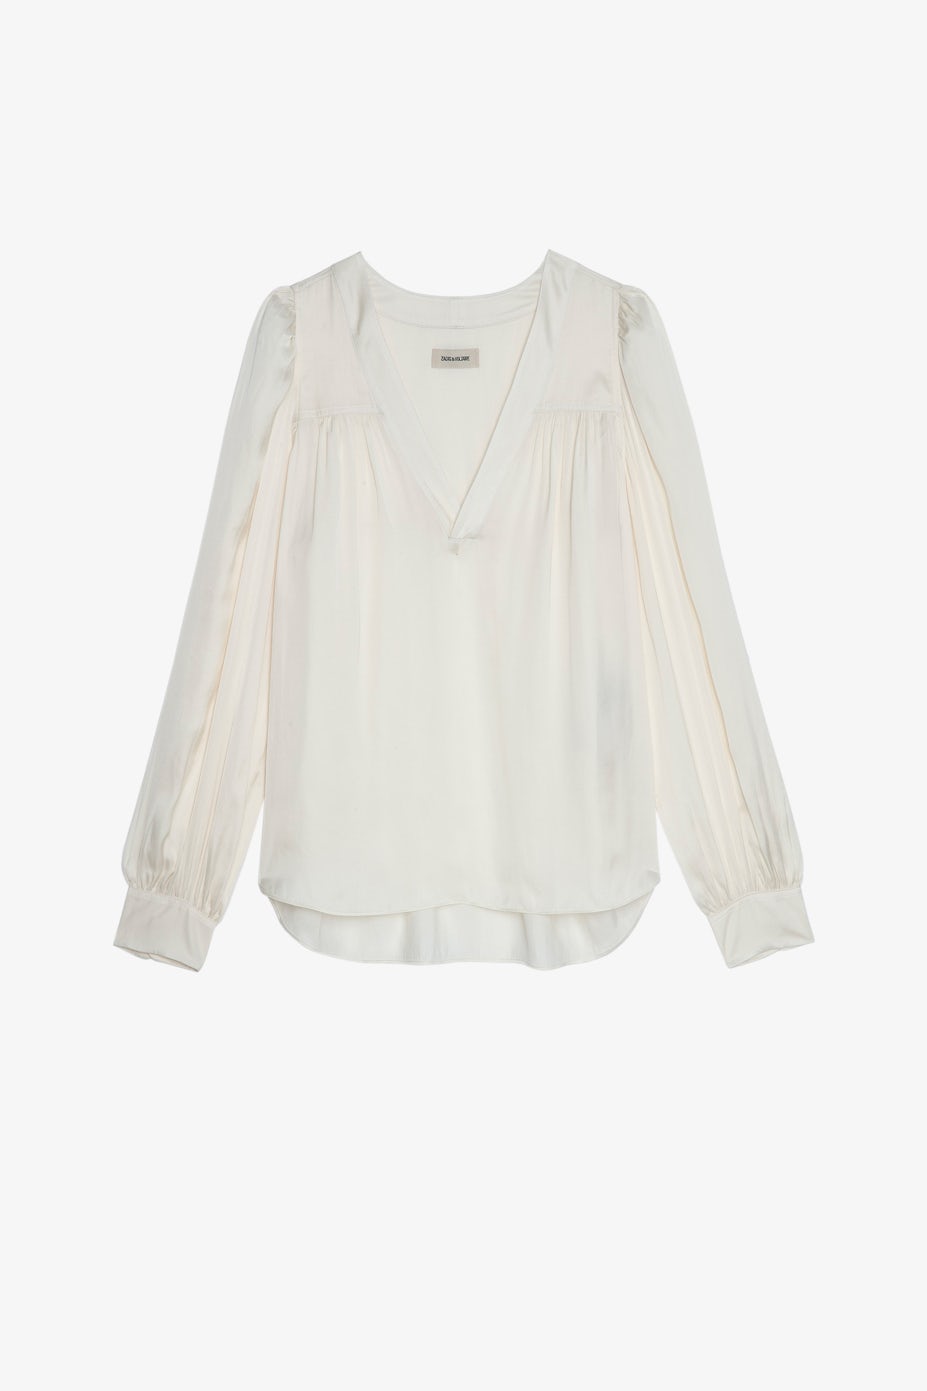 Women’s chic blouses, camisoles, shirts and tops | Zadig&Voltaire